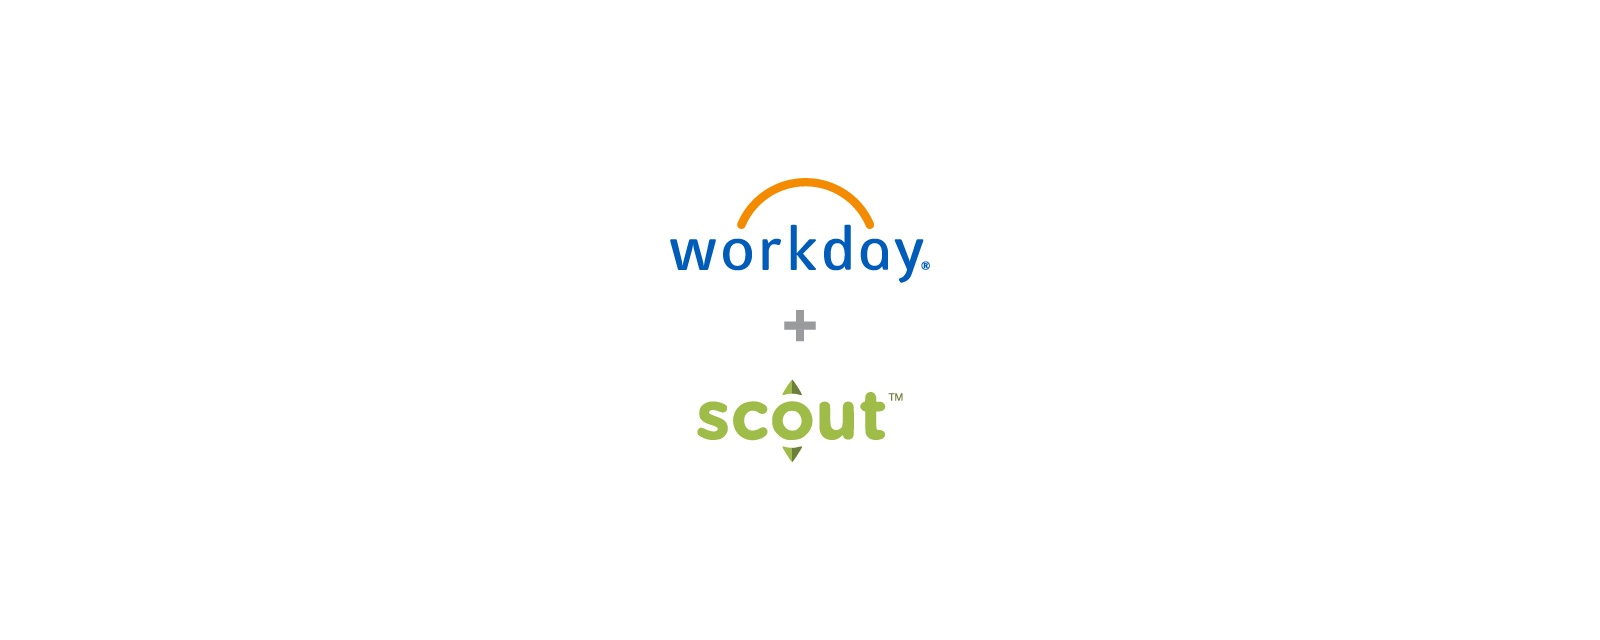 Workday to Acquire Scout RFP: Helping Transform the Office of ...